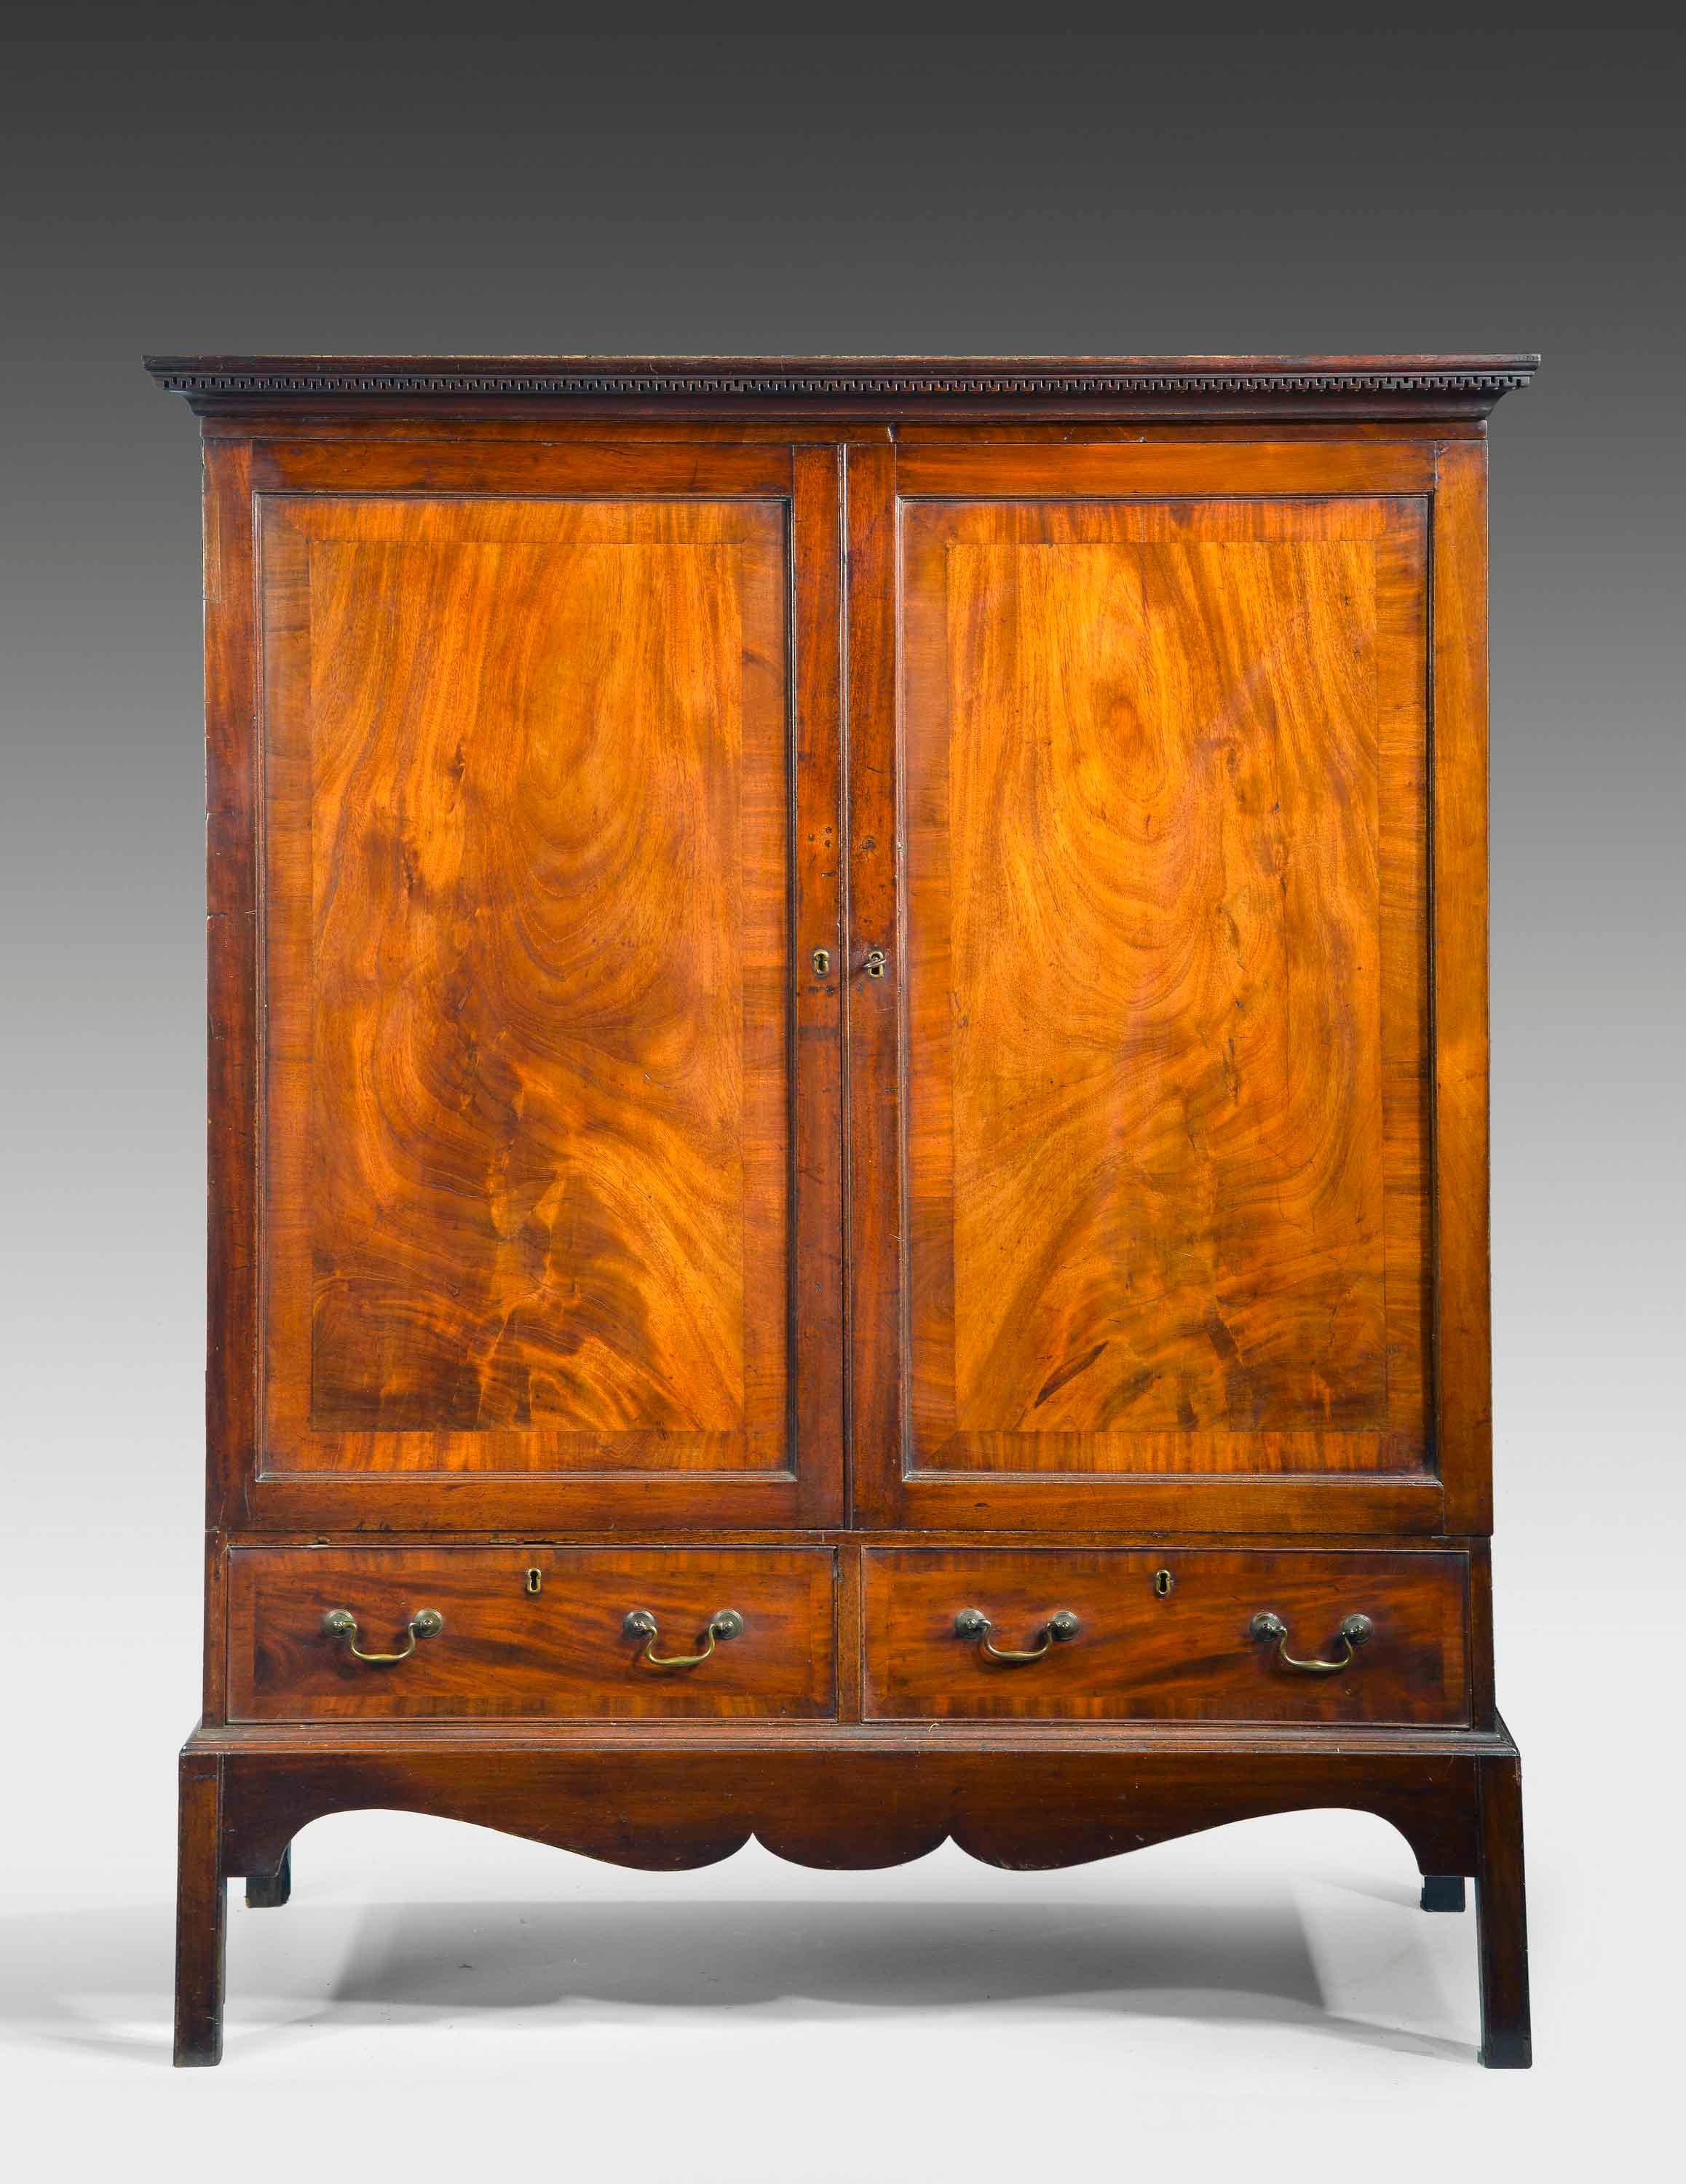 A George III Irish mahogany press. The doors crossbanded in well figured timbers. The top with a fine cornice. Two draws to the base section on square supports.